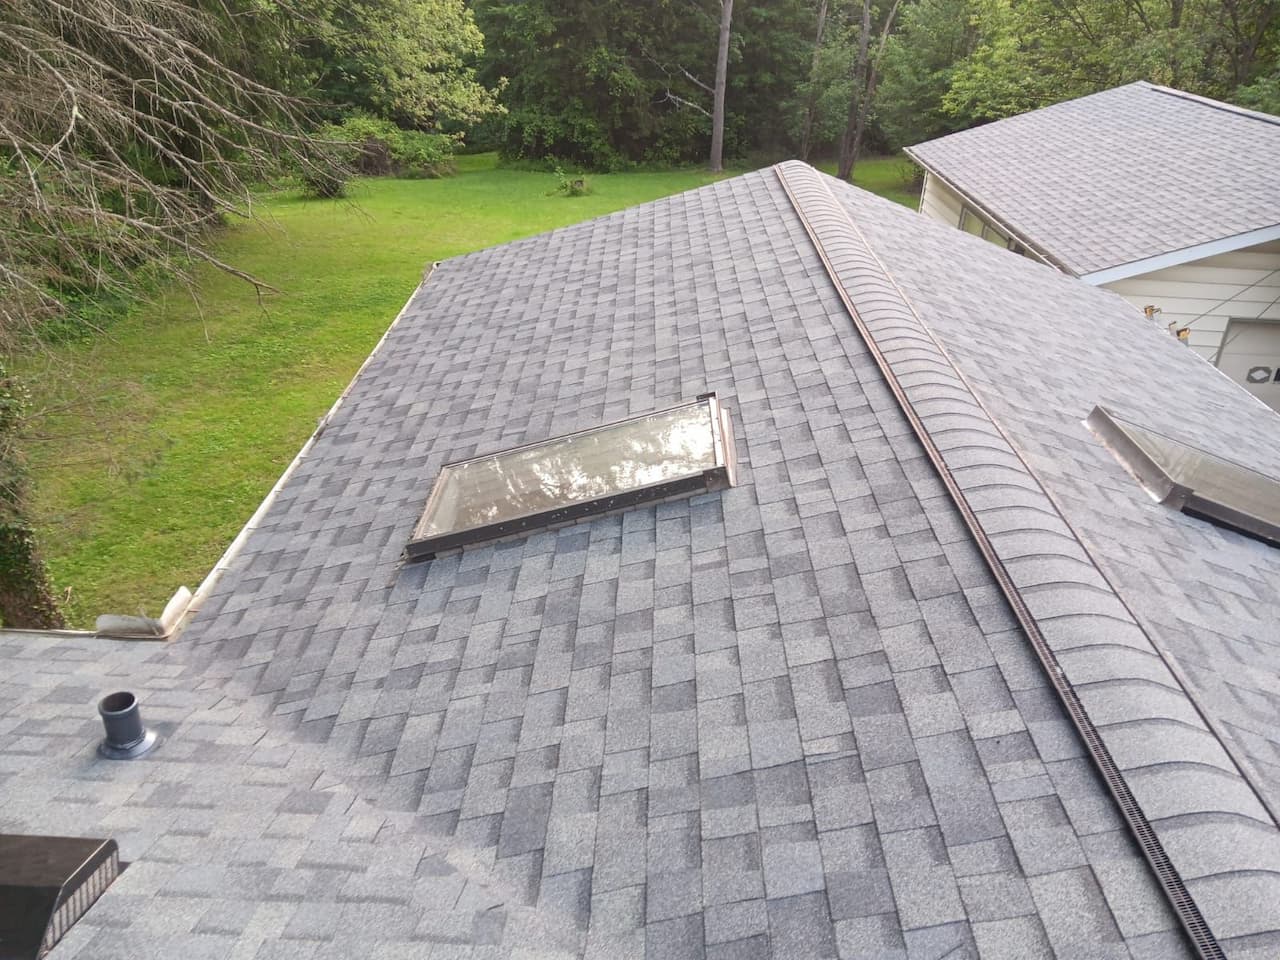 An aerial view of a gray shingled roof with keywords incorporated for SEO work.